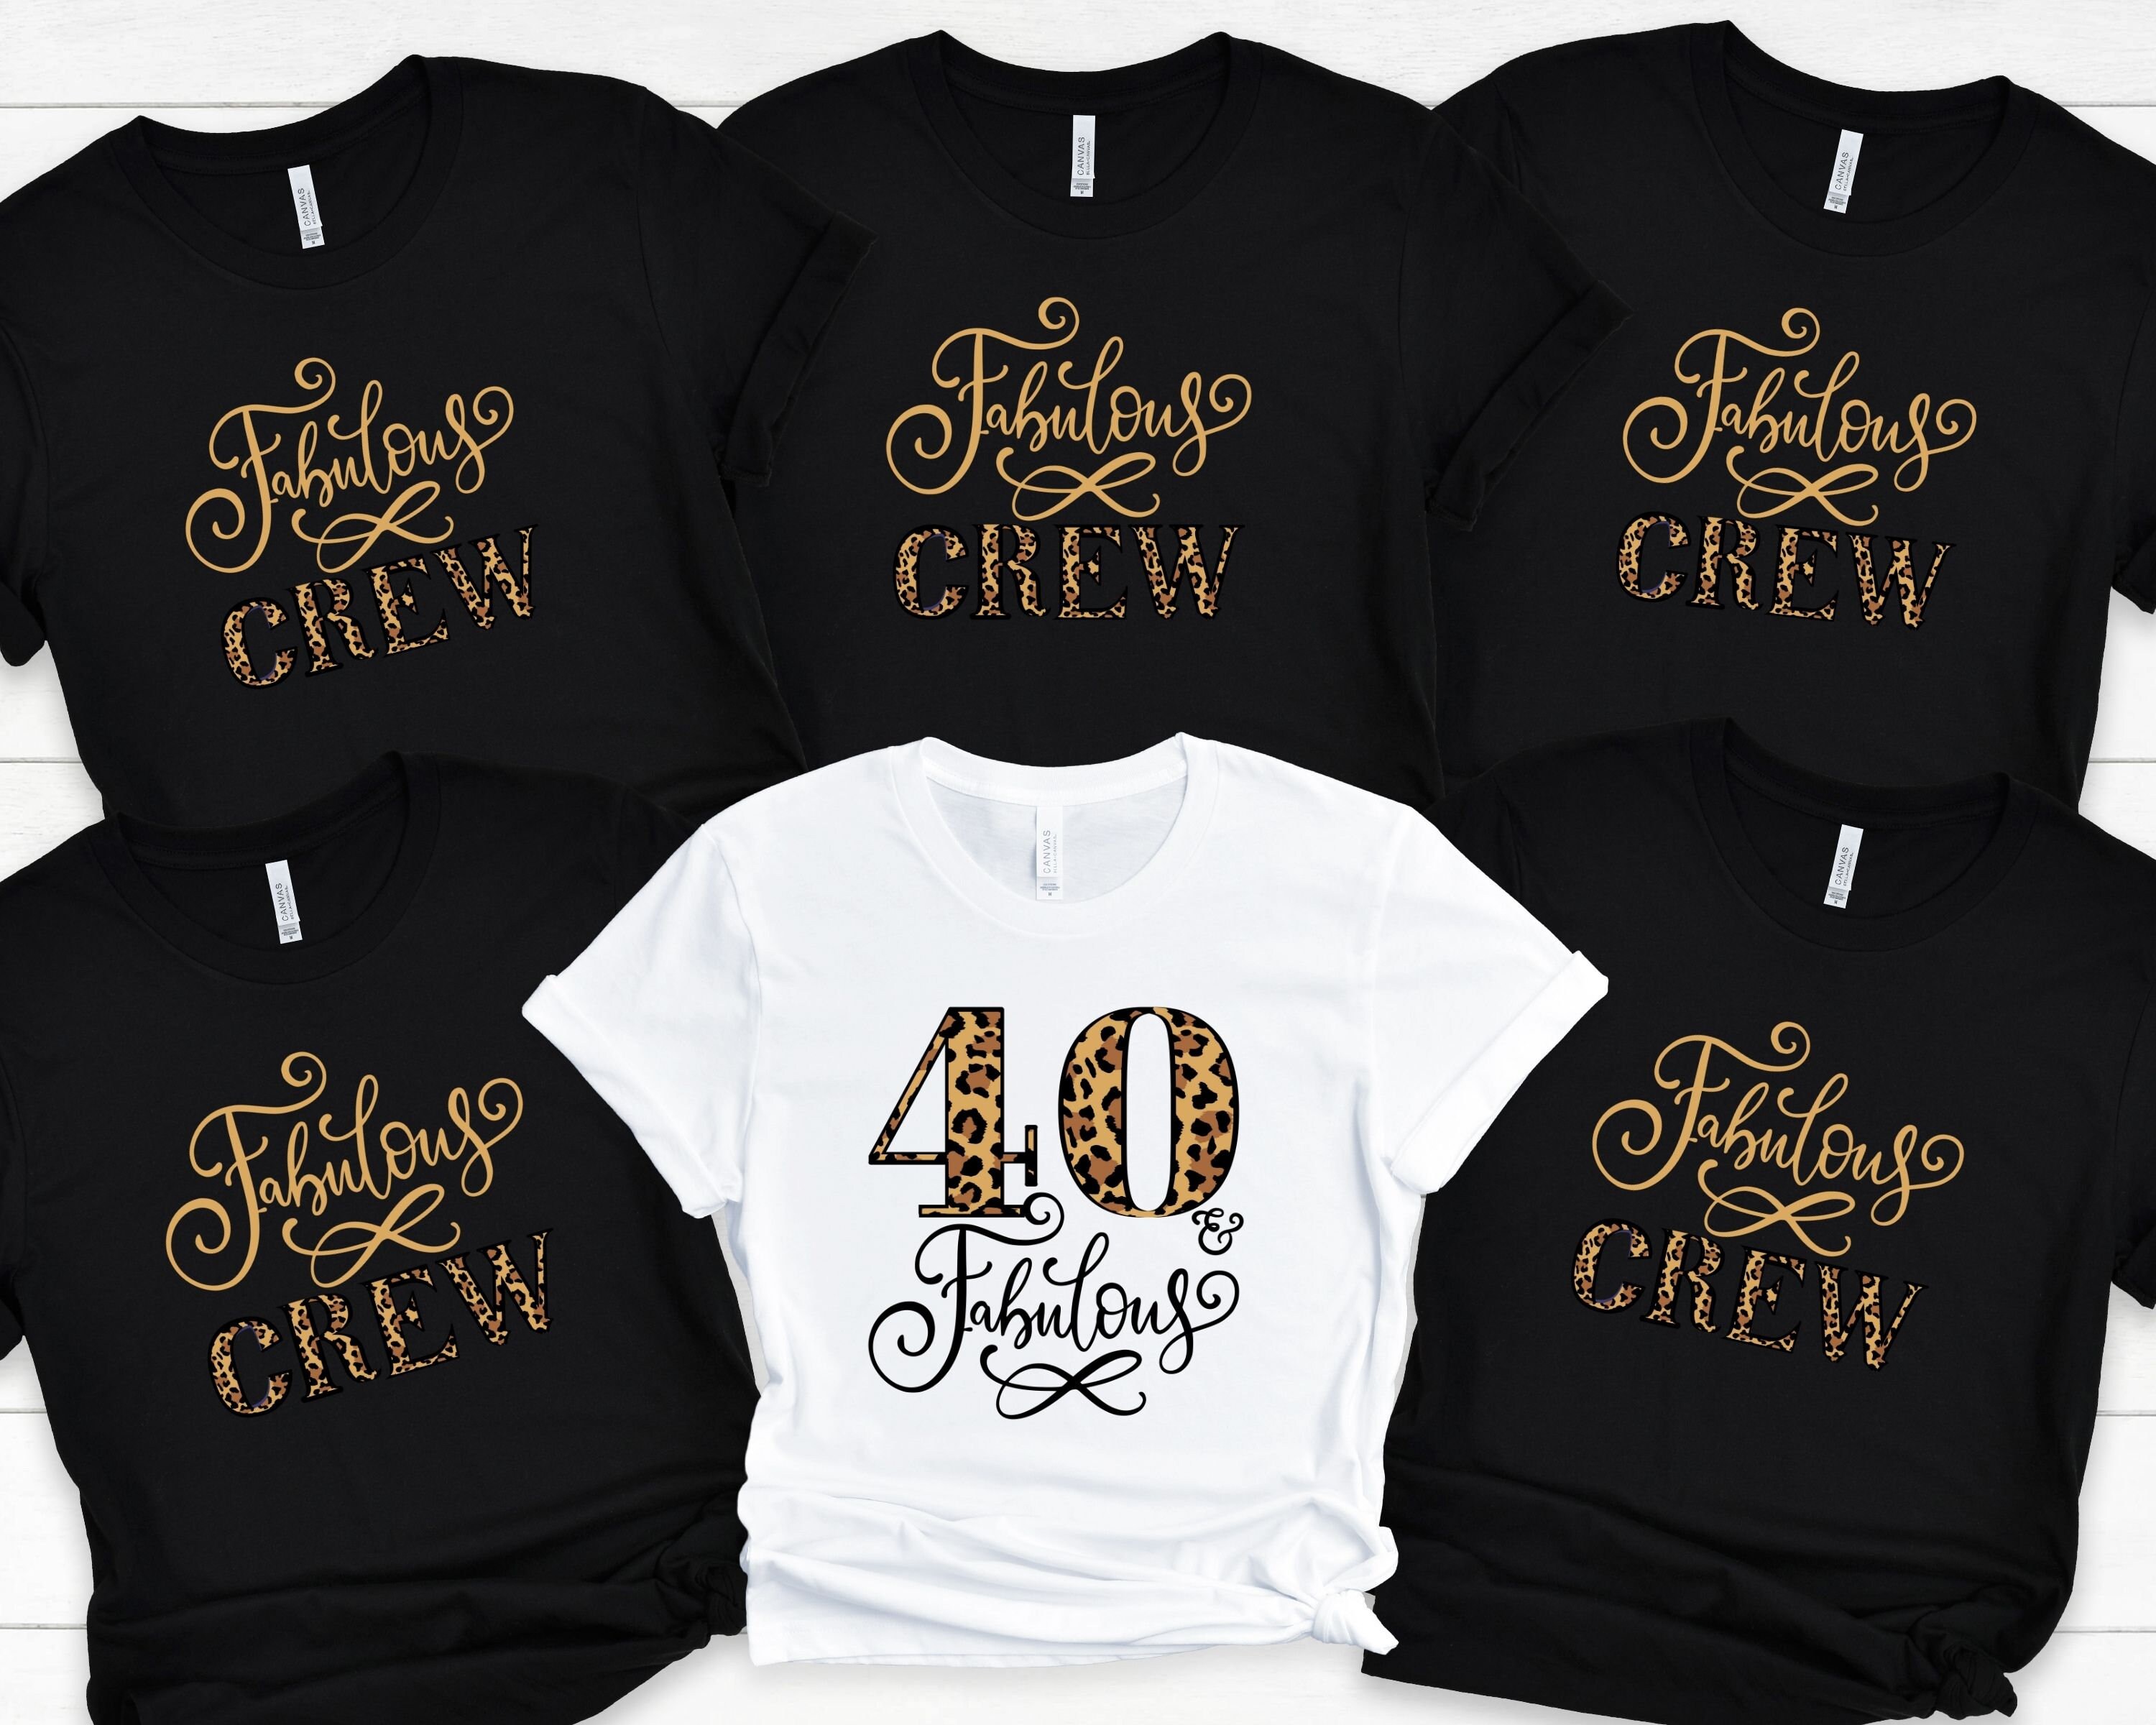 Forty T-Shirt 40 Birthday Tshirt 40 and Fabulous 40 Af Tee 40th Birthday Shirt 40th Birthday Tee 